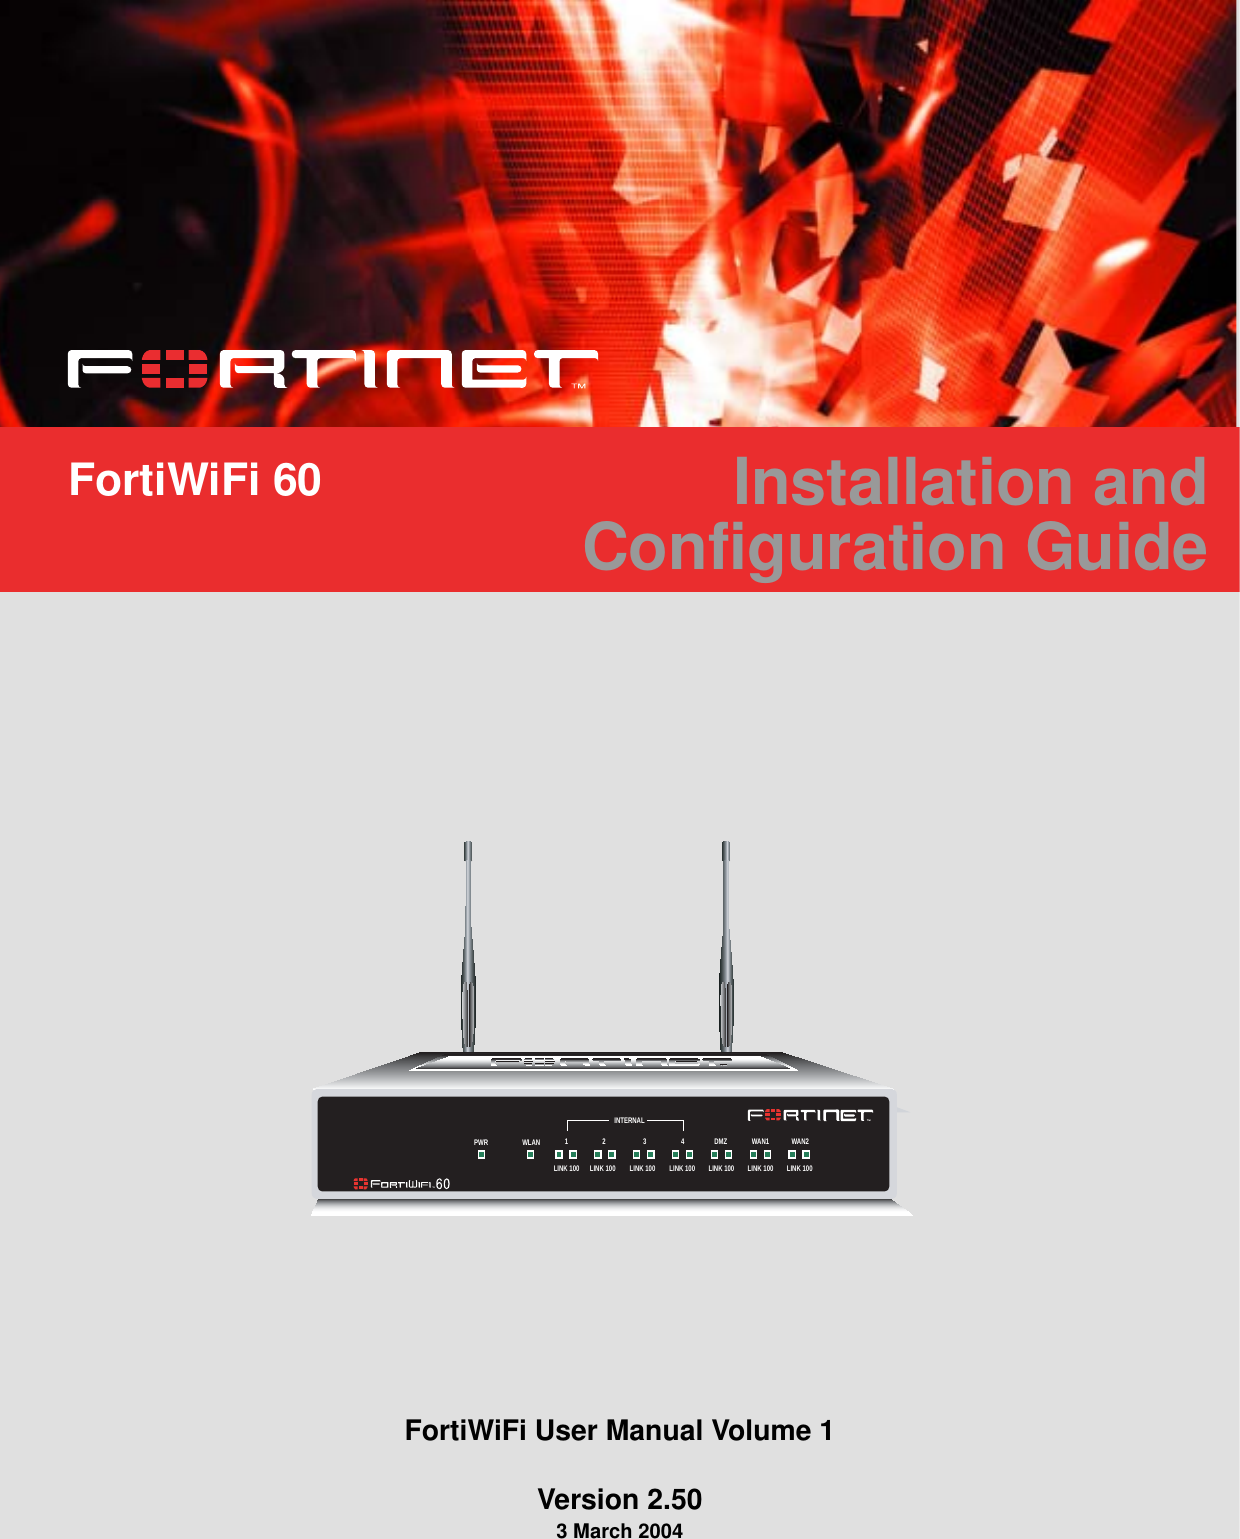 FortiWiFi 60 Installation andConfiguration GuideINTERNALDMZ4321LINK 100 LINK 100 LINK 100 LINK 100 LINK 100 LINK 100 LINK 100WAN1 WAN2PWR WLANFortiWiFi User Manual Volume 1Version 2.503 March 2004